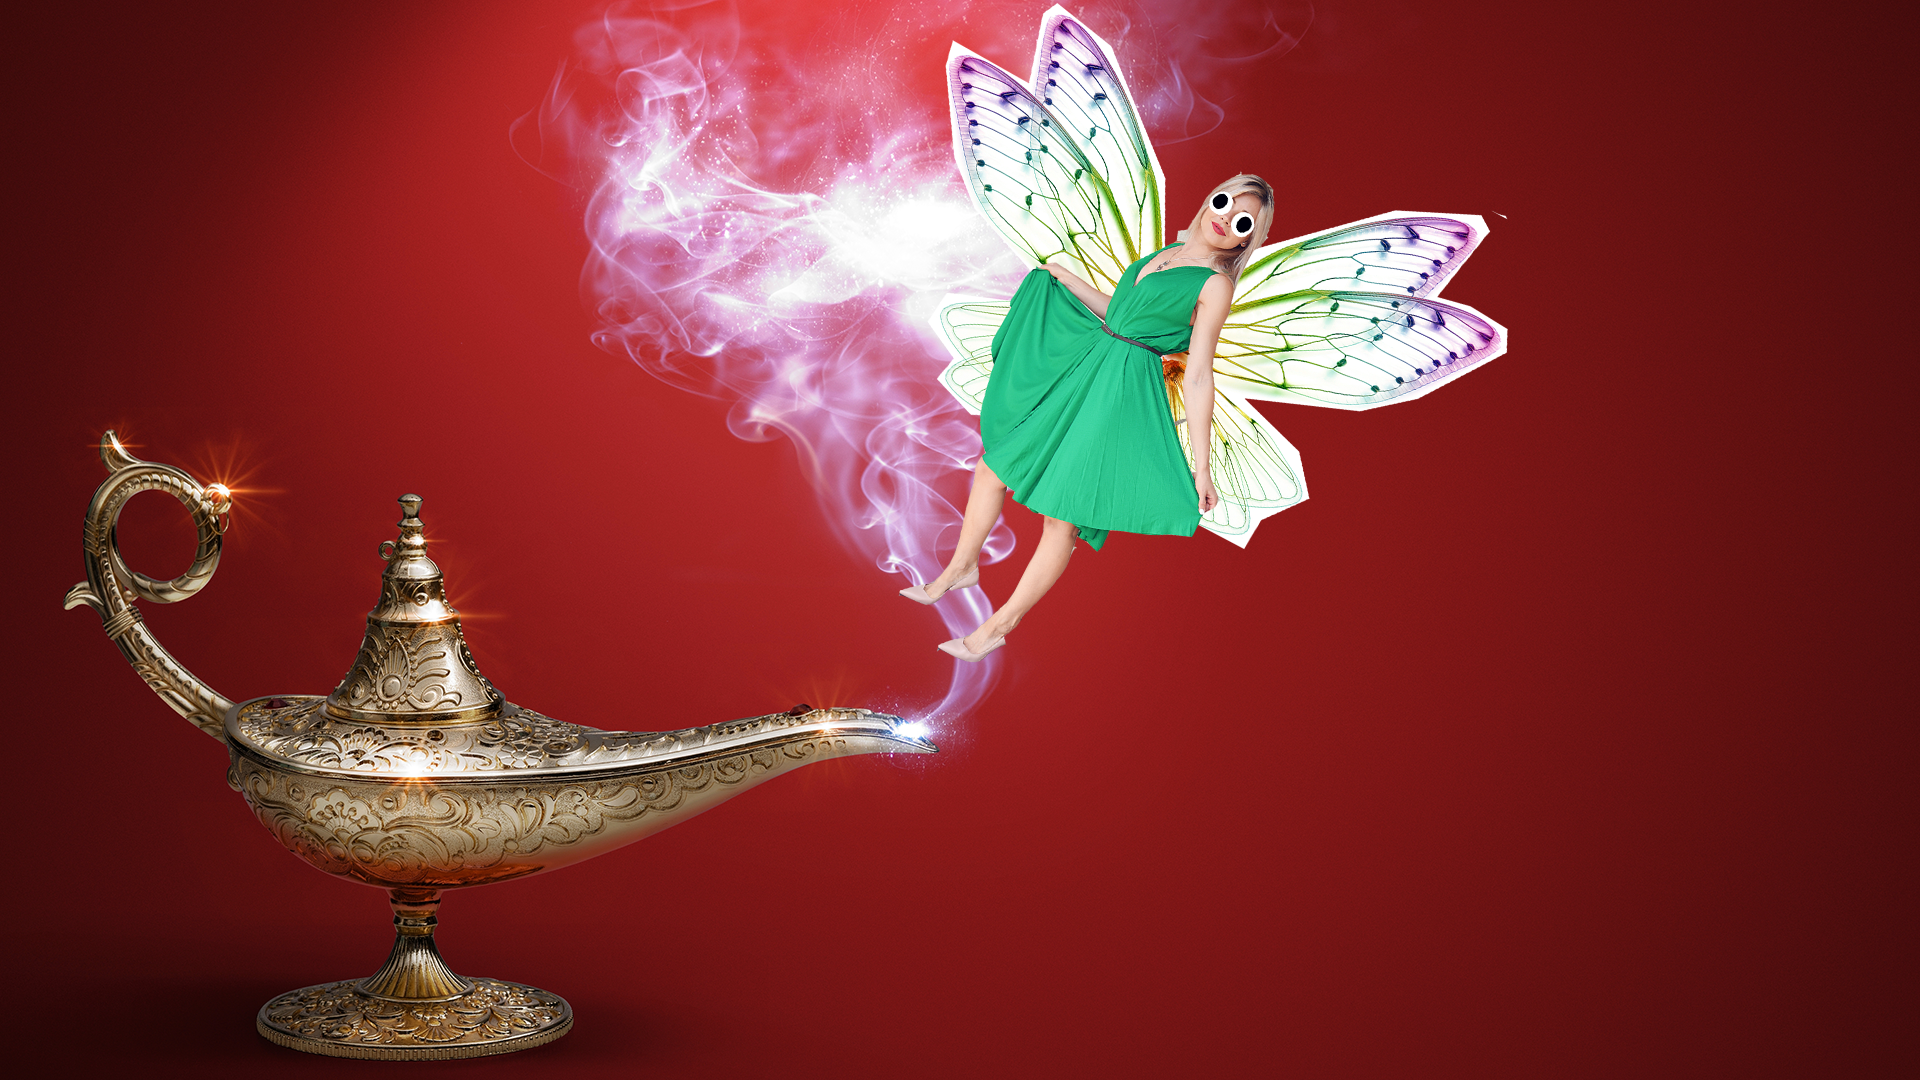 A magic lamp with a fairy coming out of it